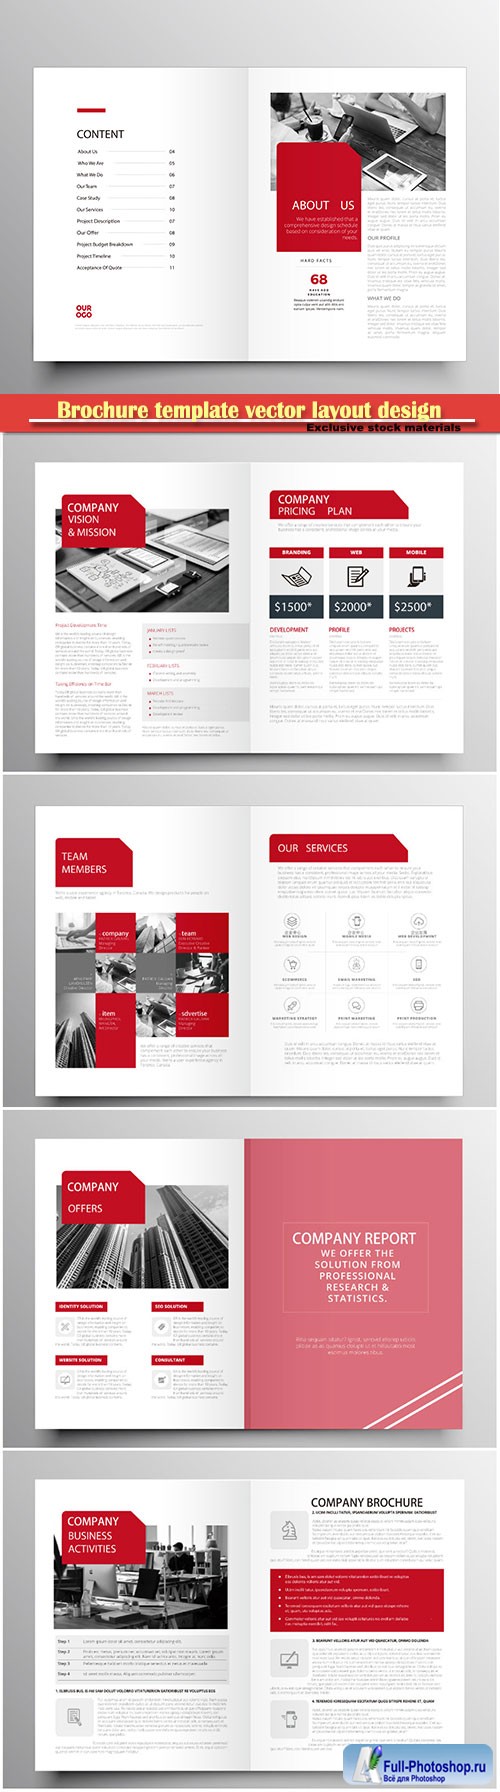 Brochure template vector layout design, corporate business annual report, magazine, flyer mockup # 181